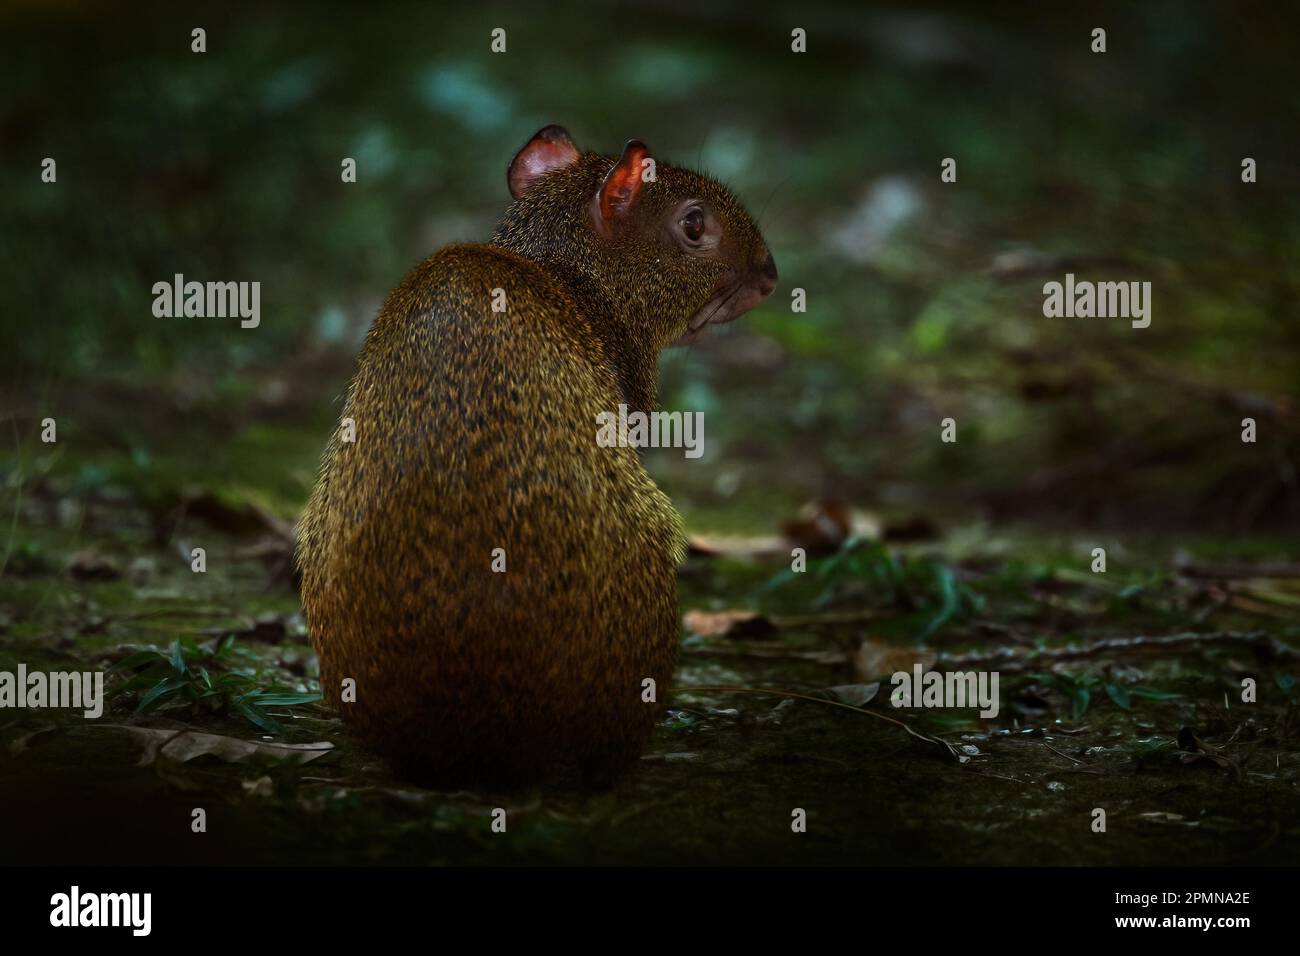 Wildlife Costa Rica. Agouti in the tropical forest. Animal in nature habitat, green jungle. Big wild mouse in green vegetation. Animal from Costa Rica Stock Photo